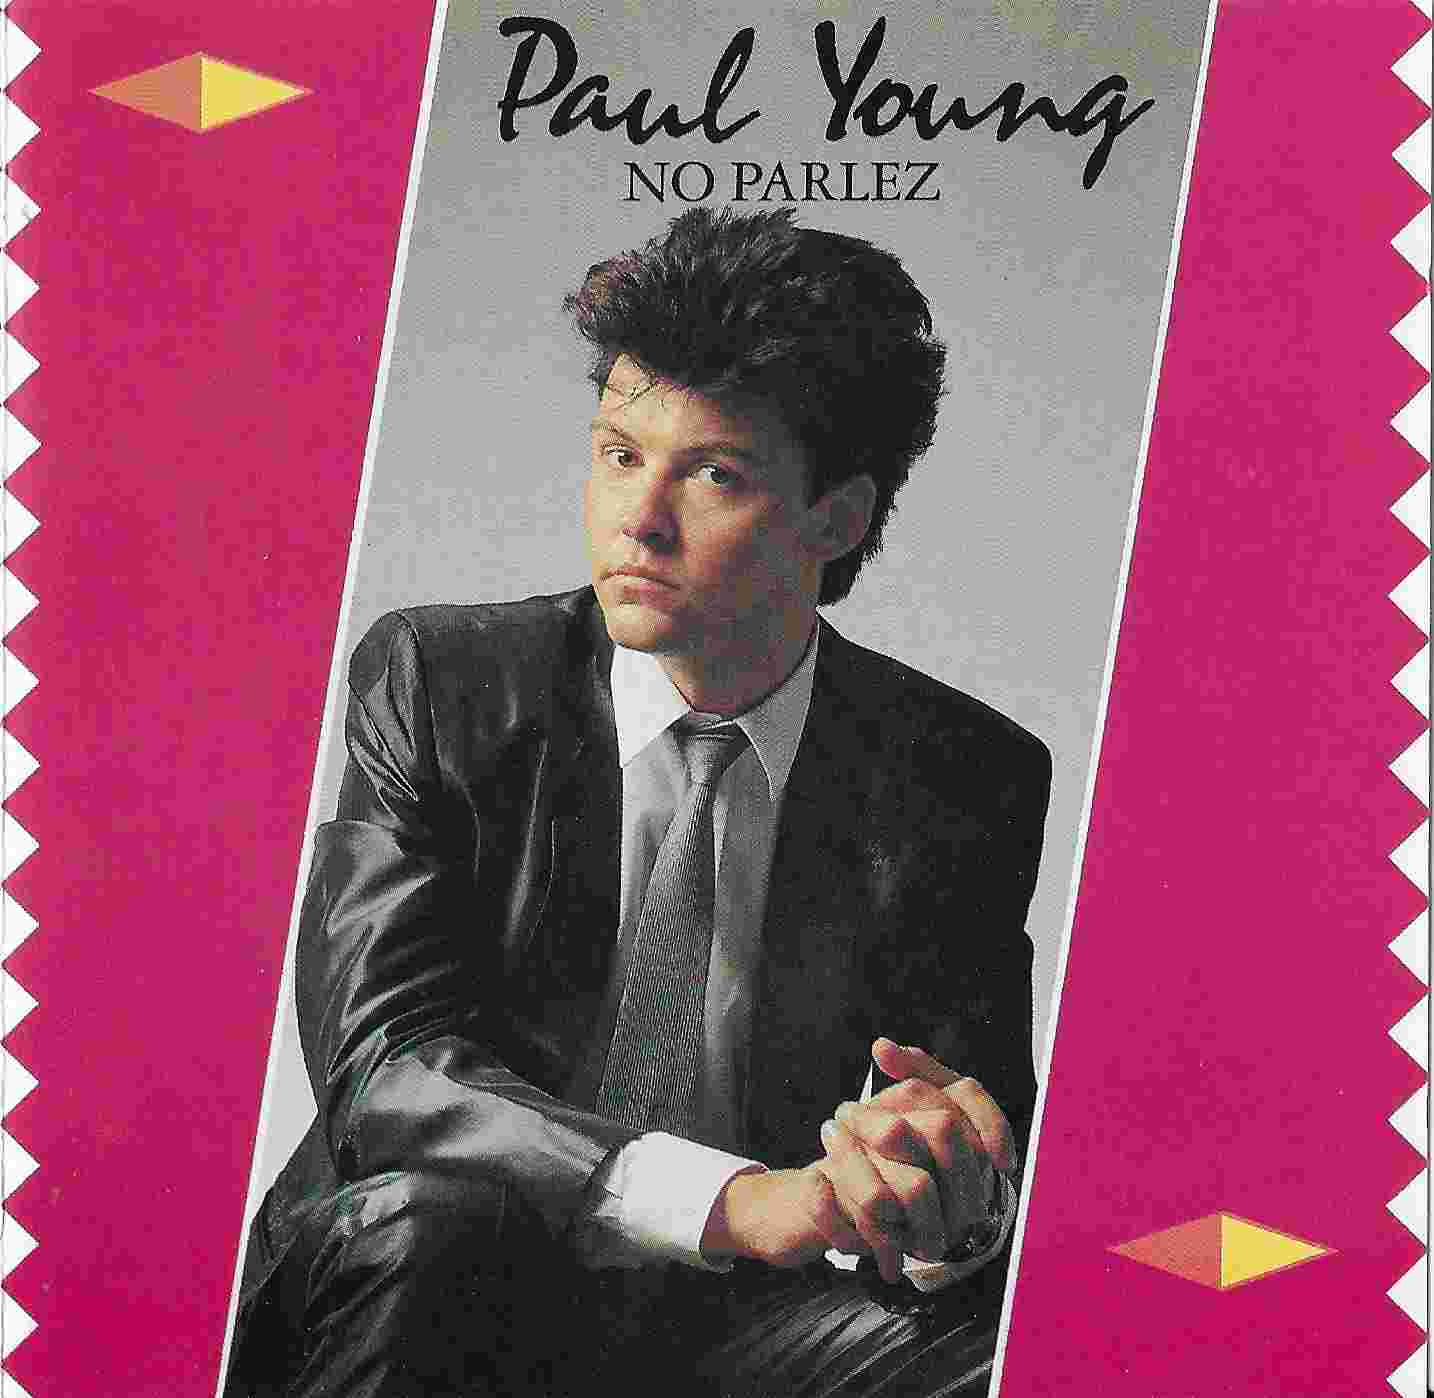 Picture of 460909 2 No parlez by artist Paul Young 